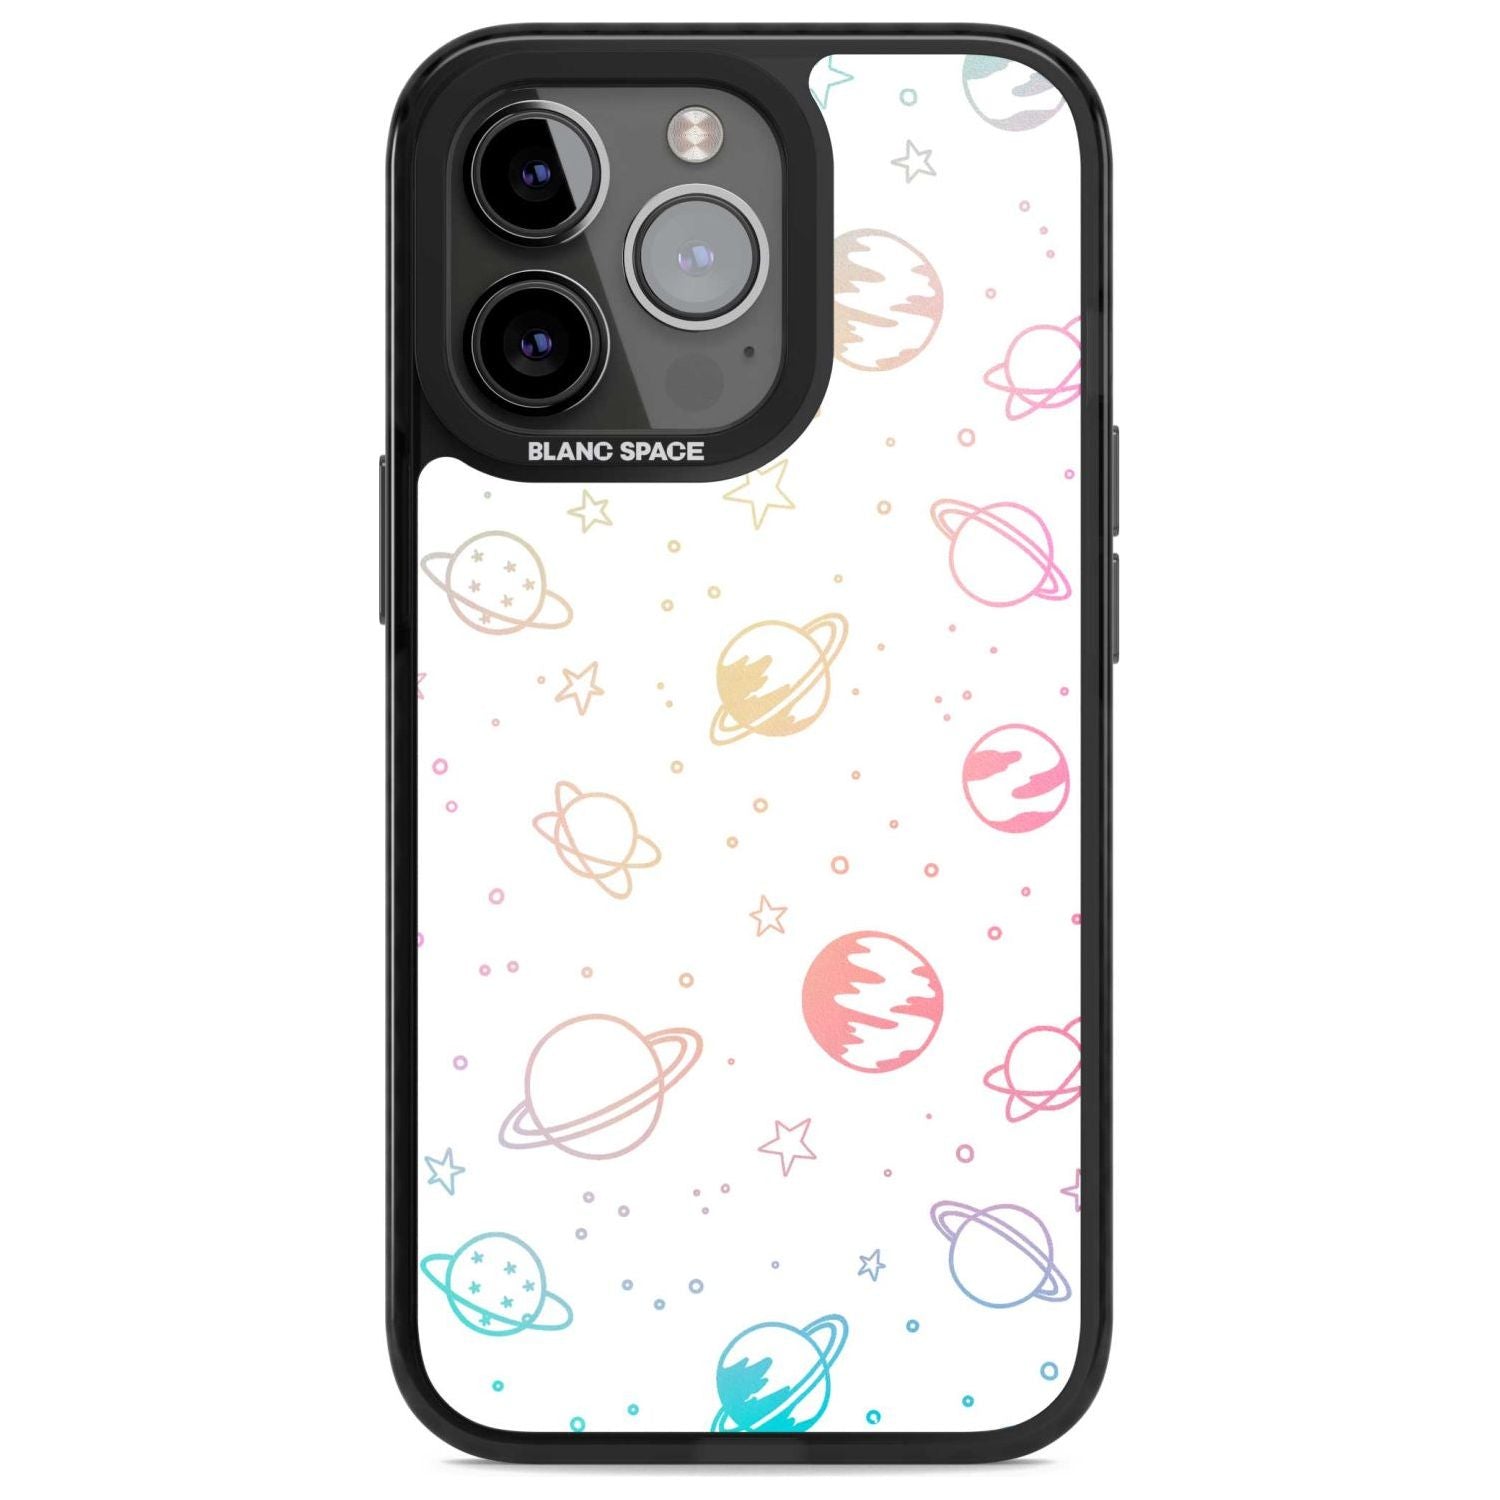 Cosmic Outer Space Design Pastels on White Phone Case iPhone 15 Pro Max / Magsafe Black Impact Case,iPhone 15 Pro / Magsafe Black Impact Case,iPhone 14 Pro Max / Magsafe Black Impact Case,iPhone 14 Pro / Magsafe Black Impact Case,iPhone 13 Pro / Magsafe Black Impact Case Blanc Space